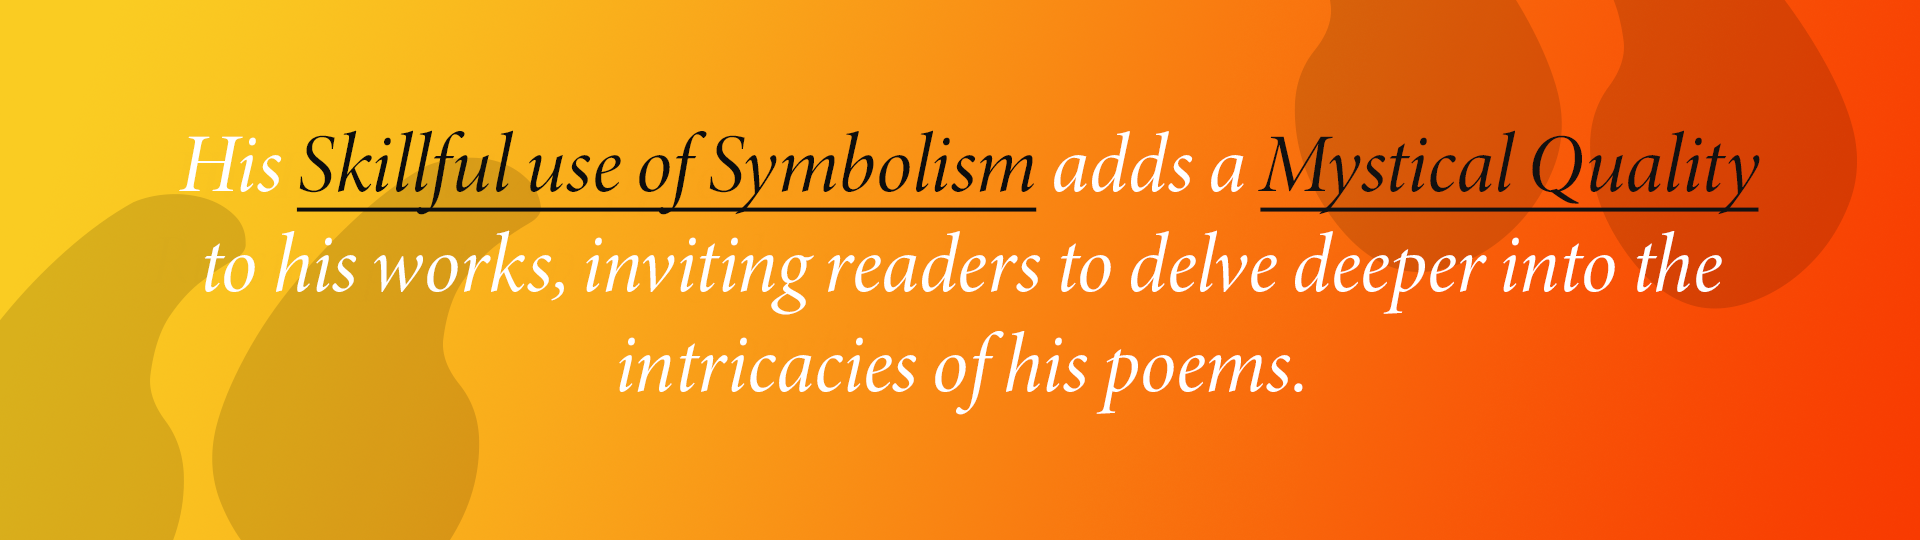  His Skillful use of Symbolism adds a Mystical Quality to his works, inviting readers to delve deeper into the intricacies of his poems.